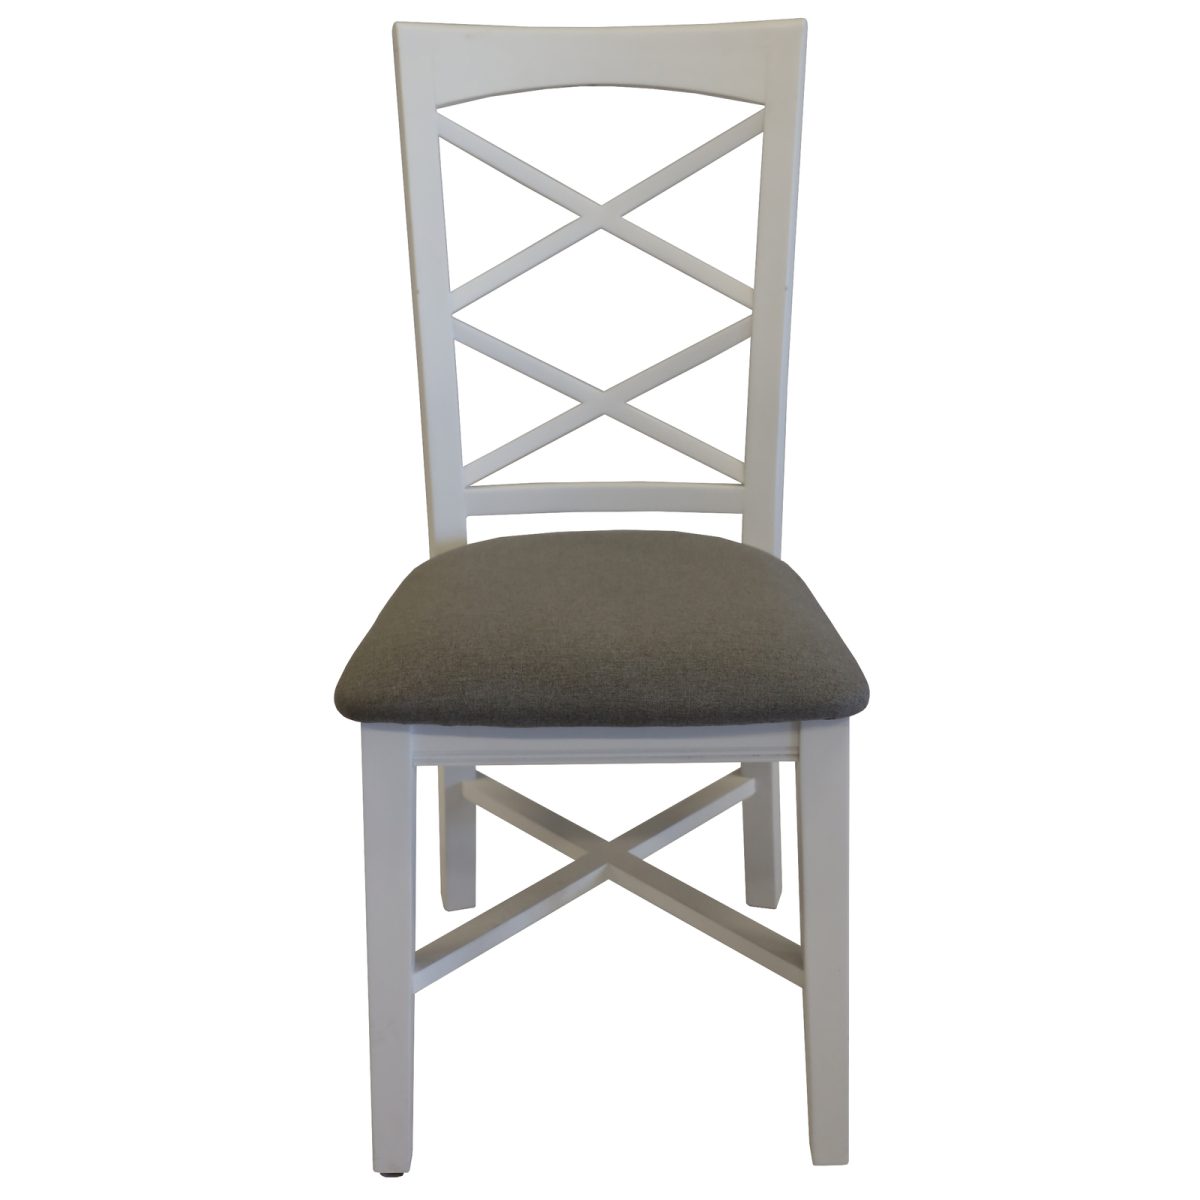 Daisy Dining Chair Set of 2 Solid Acacia Timber Wood Hampton Furniture – White